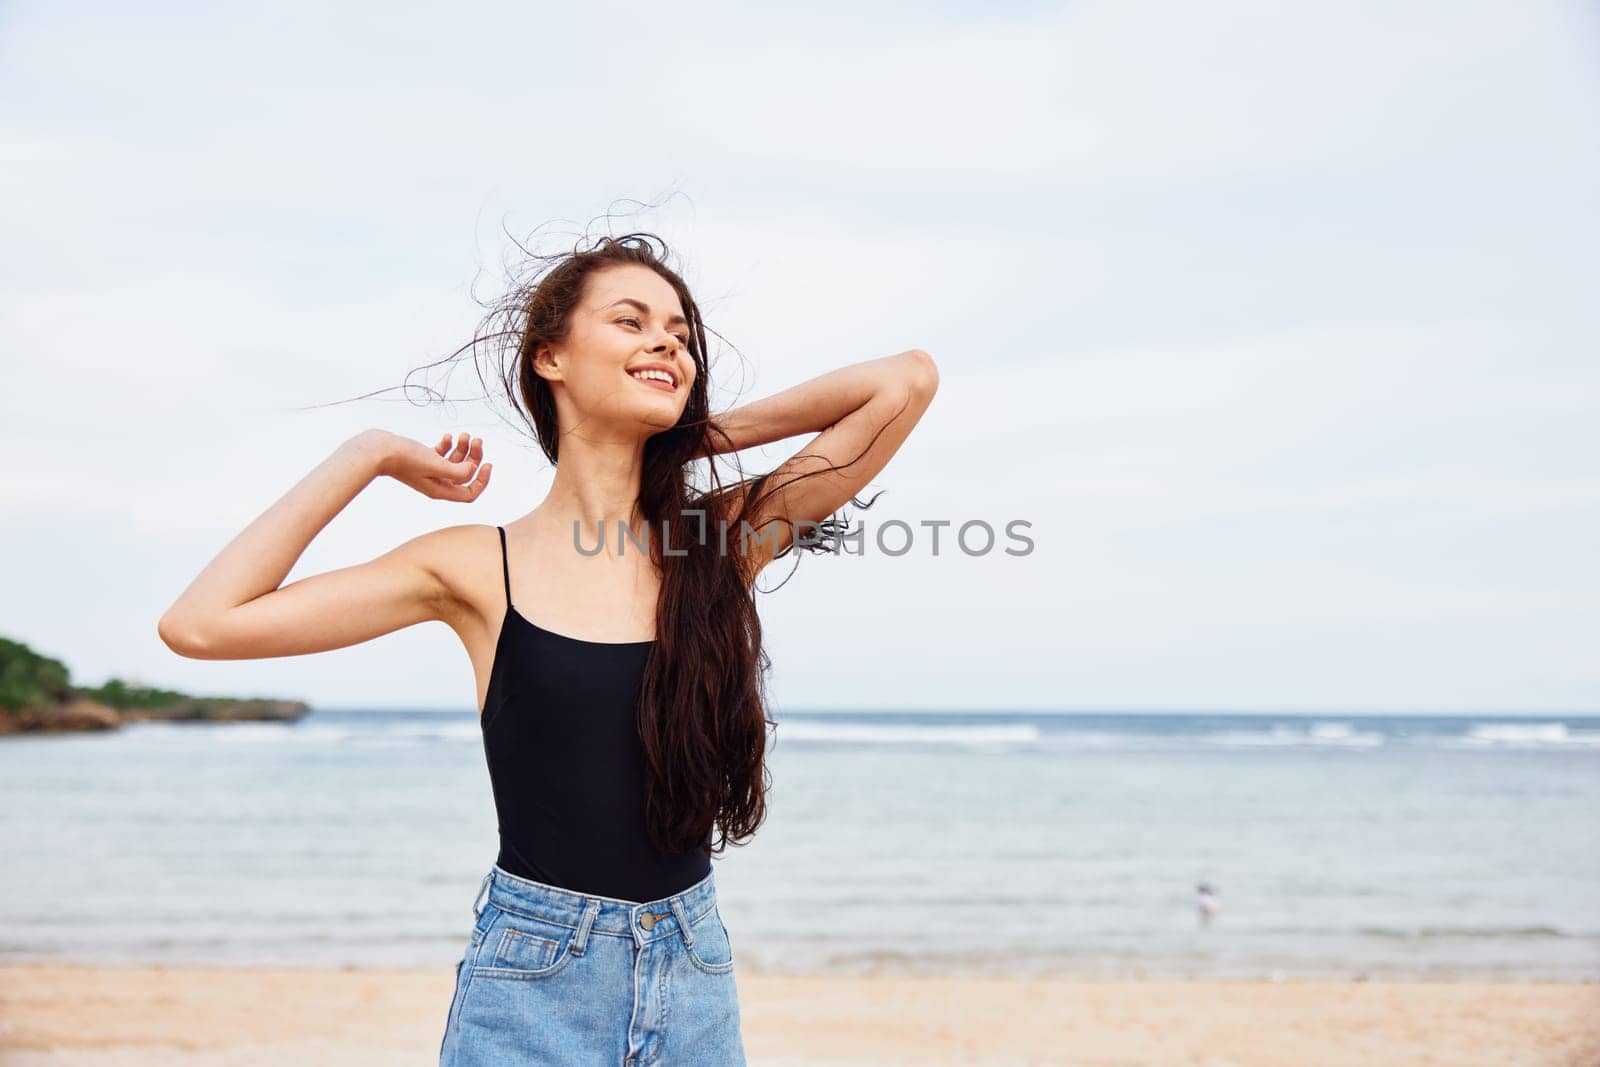 sand woman nature smile summer young ocean beautiful vacation sea beach by SHOTPRIME